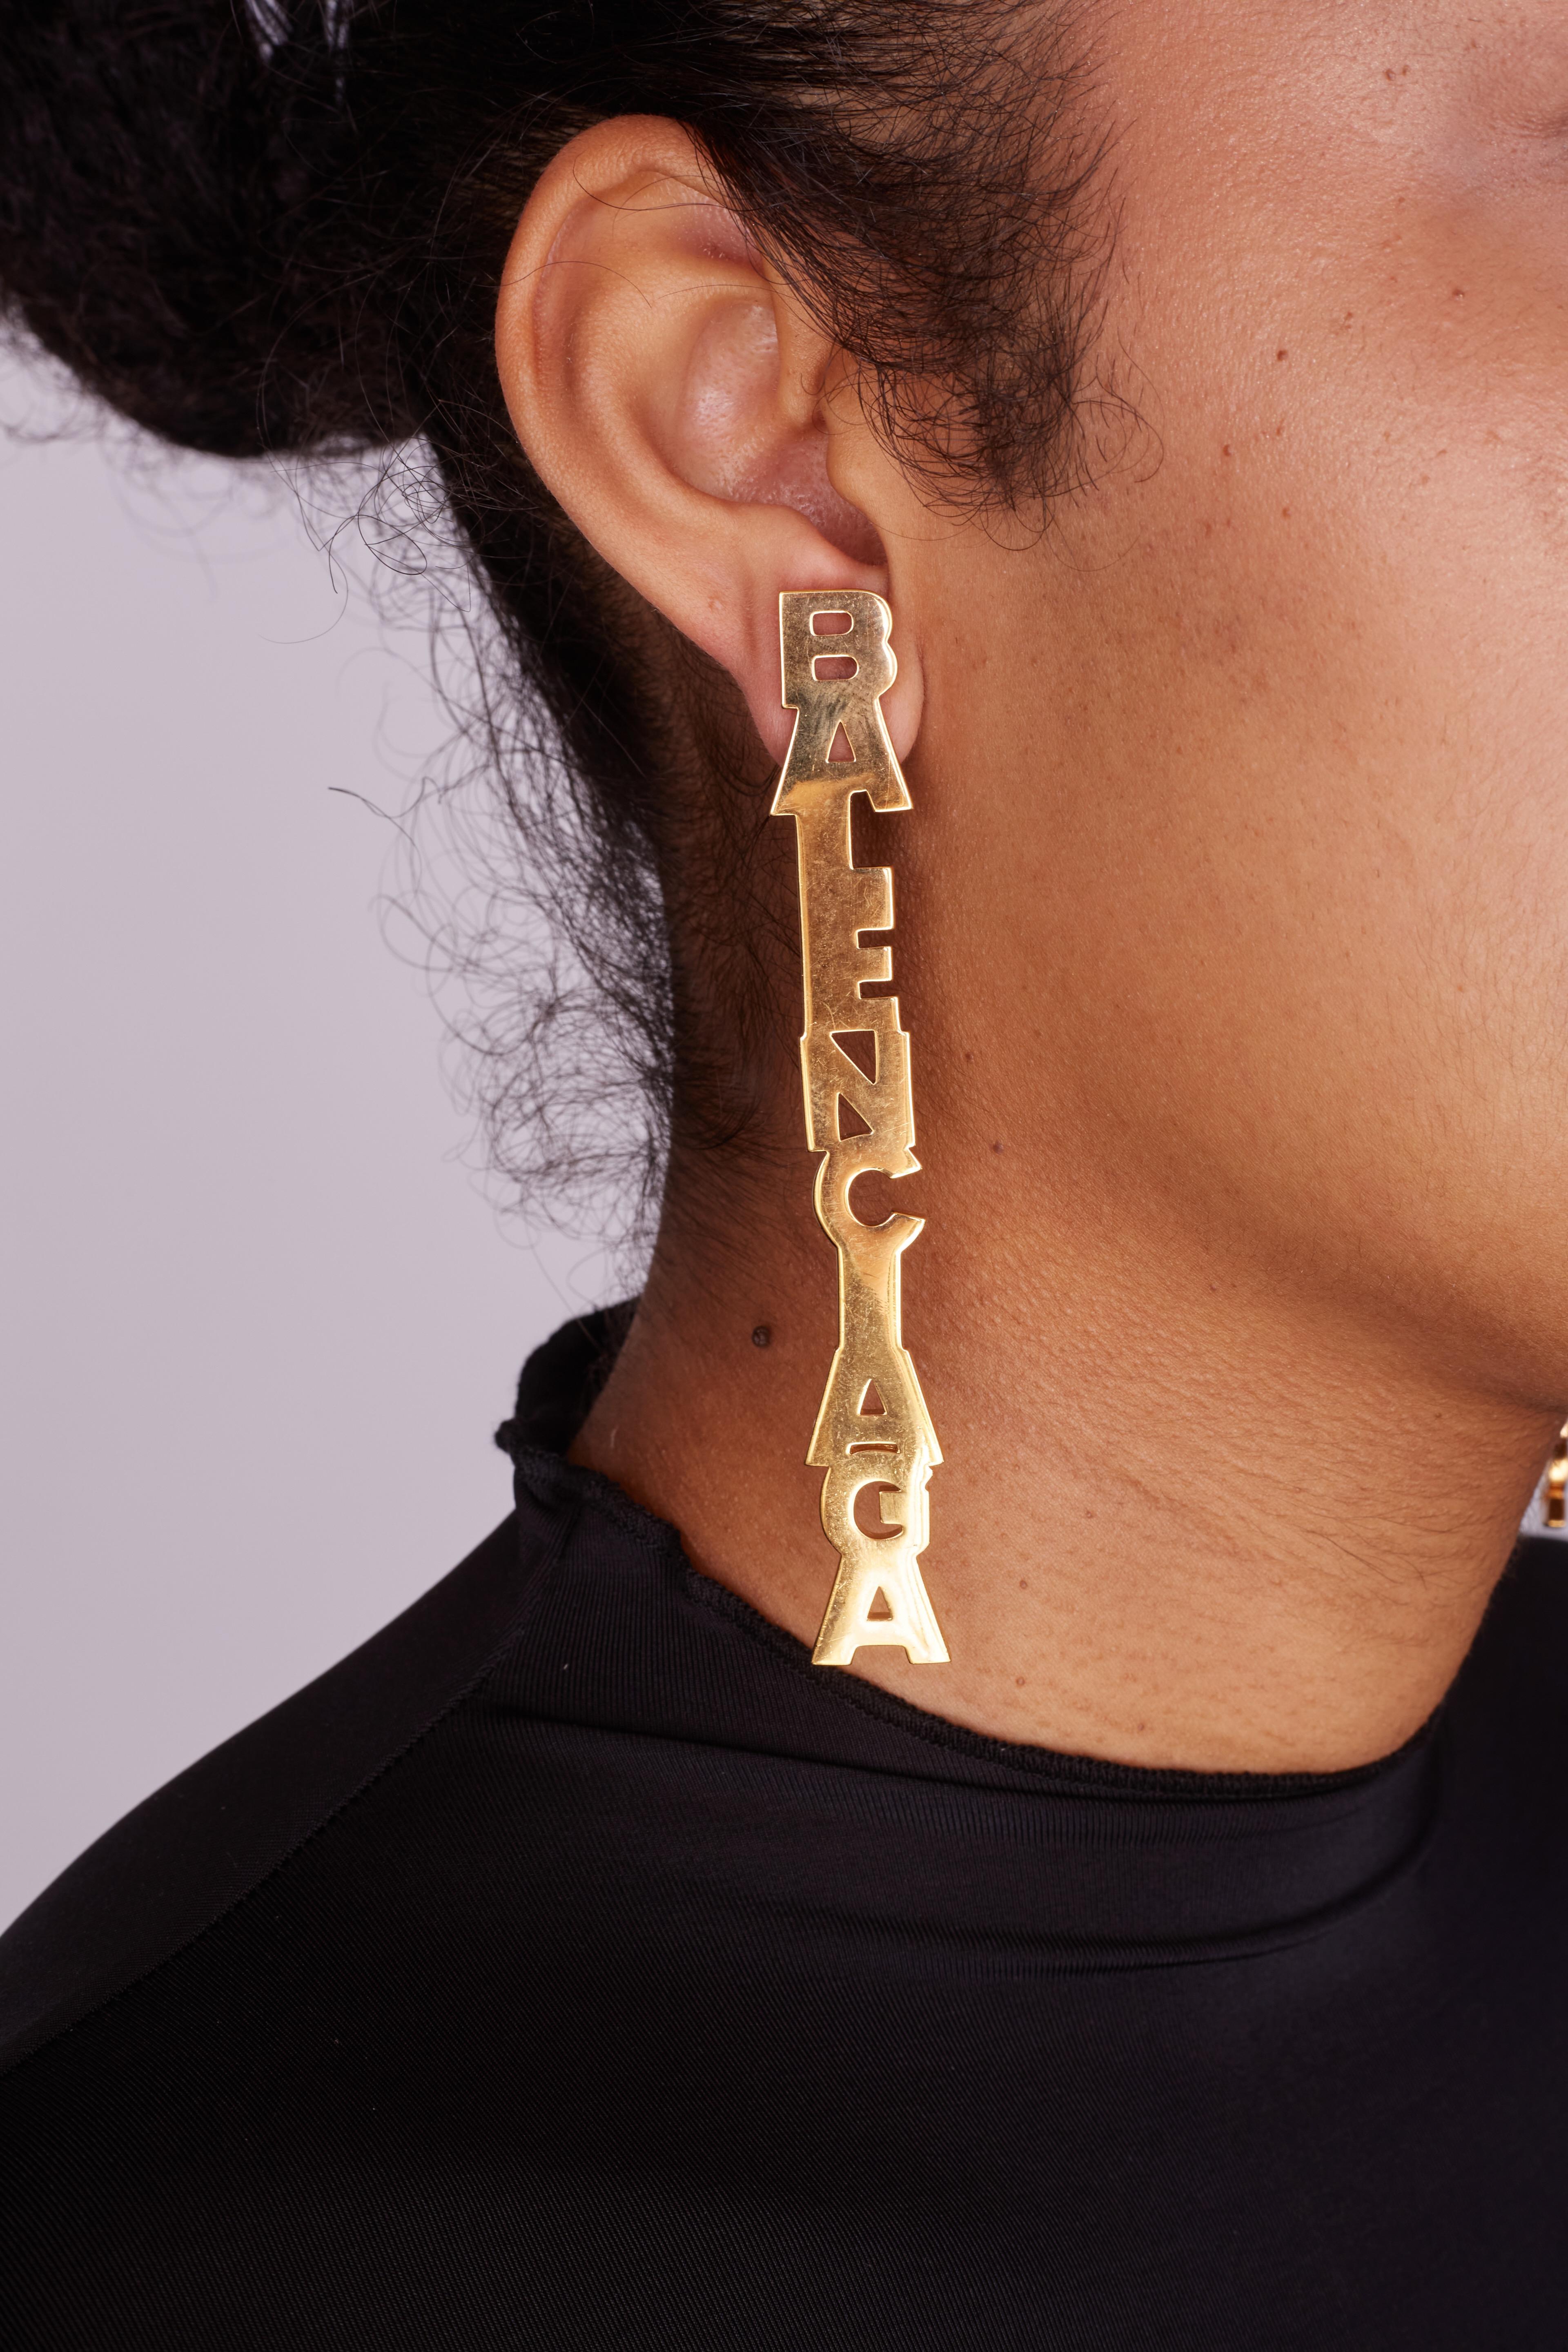 BALENCIAGA MISMATCHED GOLD LOGO I LOVE PARIS DROP EARRINGS

Color: Gold tone
Material: Brass
Marks: Designer Signature
Total Item Weight (g): 36.2
Clasp Style: for pierced ears/Clutch Back

Measures: 4” x .5”
Condition: Good. Pre loved.

Made in